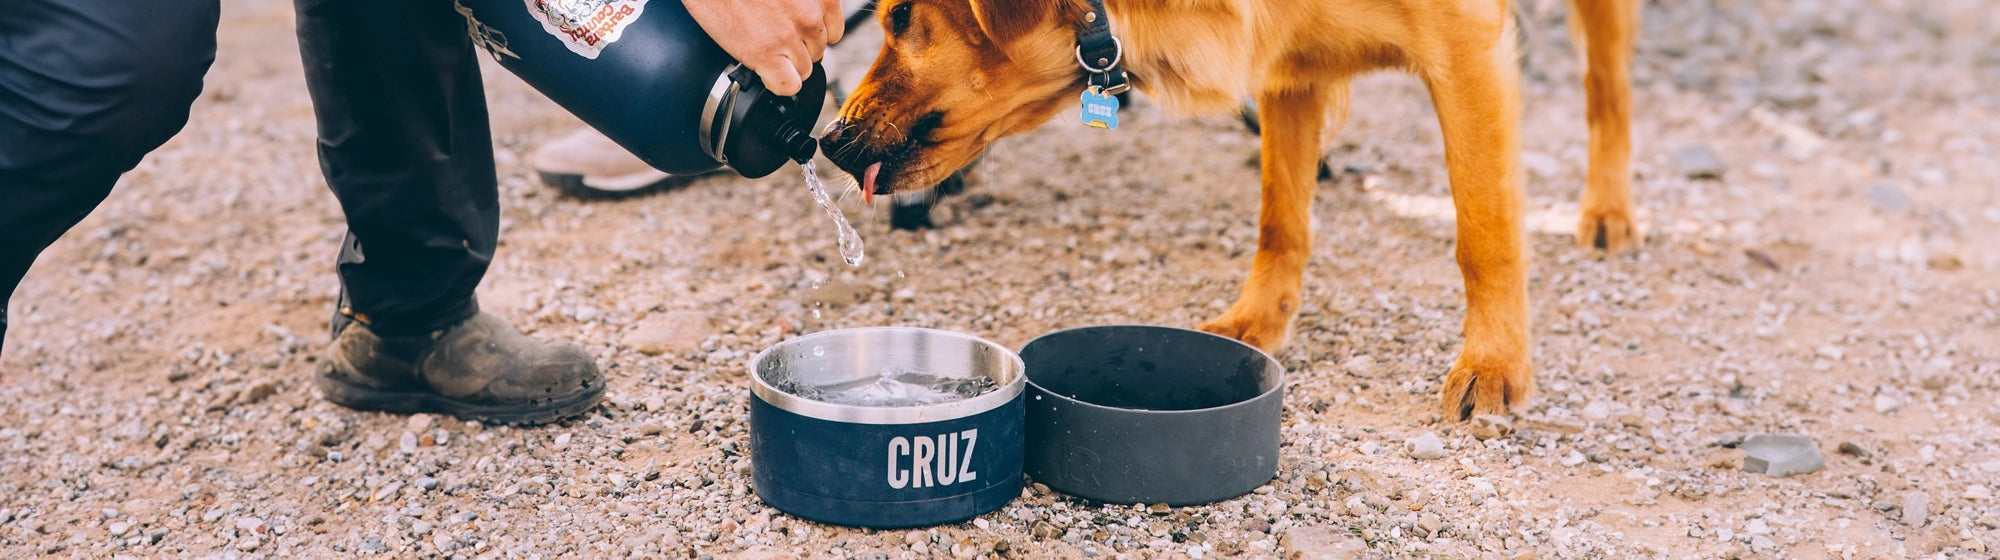 Personalized dog bowl engraved with dog name.  Image shows dog drinking from a jug that is pouring water into its bowl.